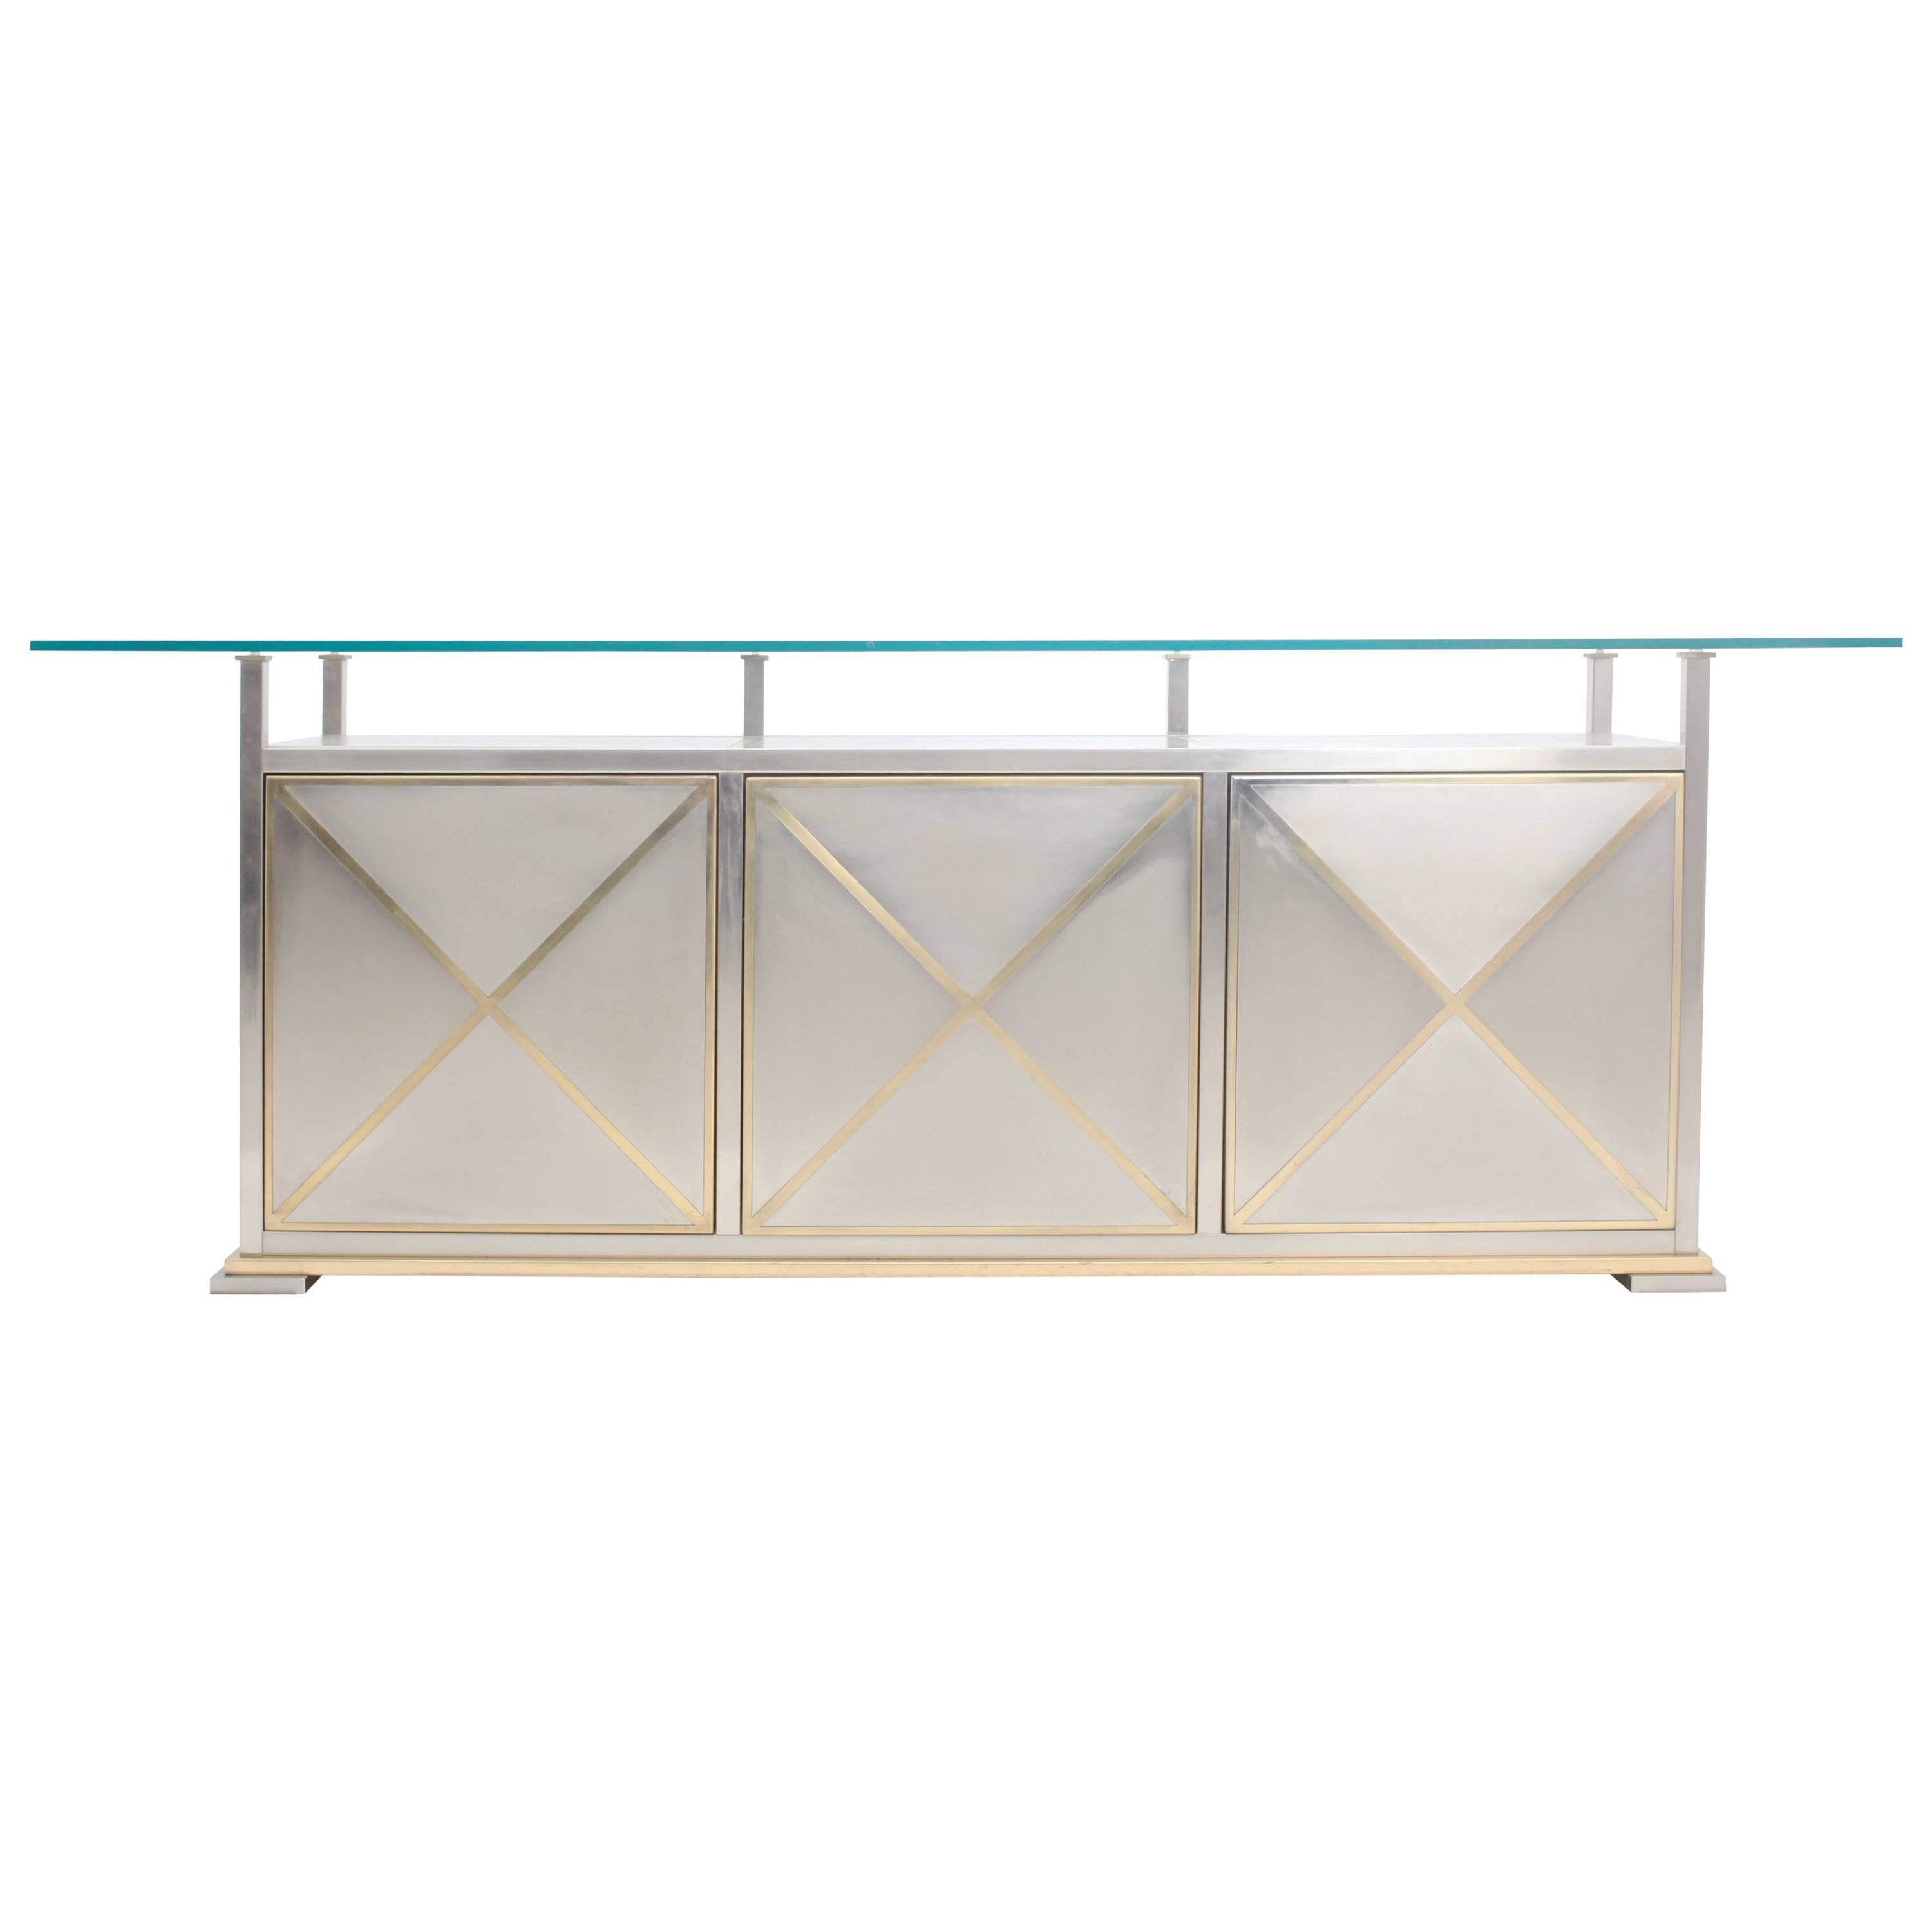 Hollywood Regency brass and steel sideboard with clear glass top and diamond patterned doors.
 
Maison Jansen
France, 1970s


Measure: L 230 cm x H 82 cm x D 52 cm.